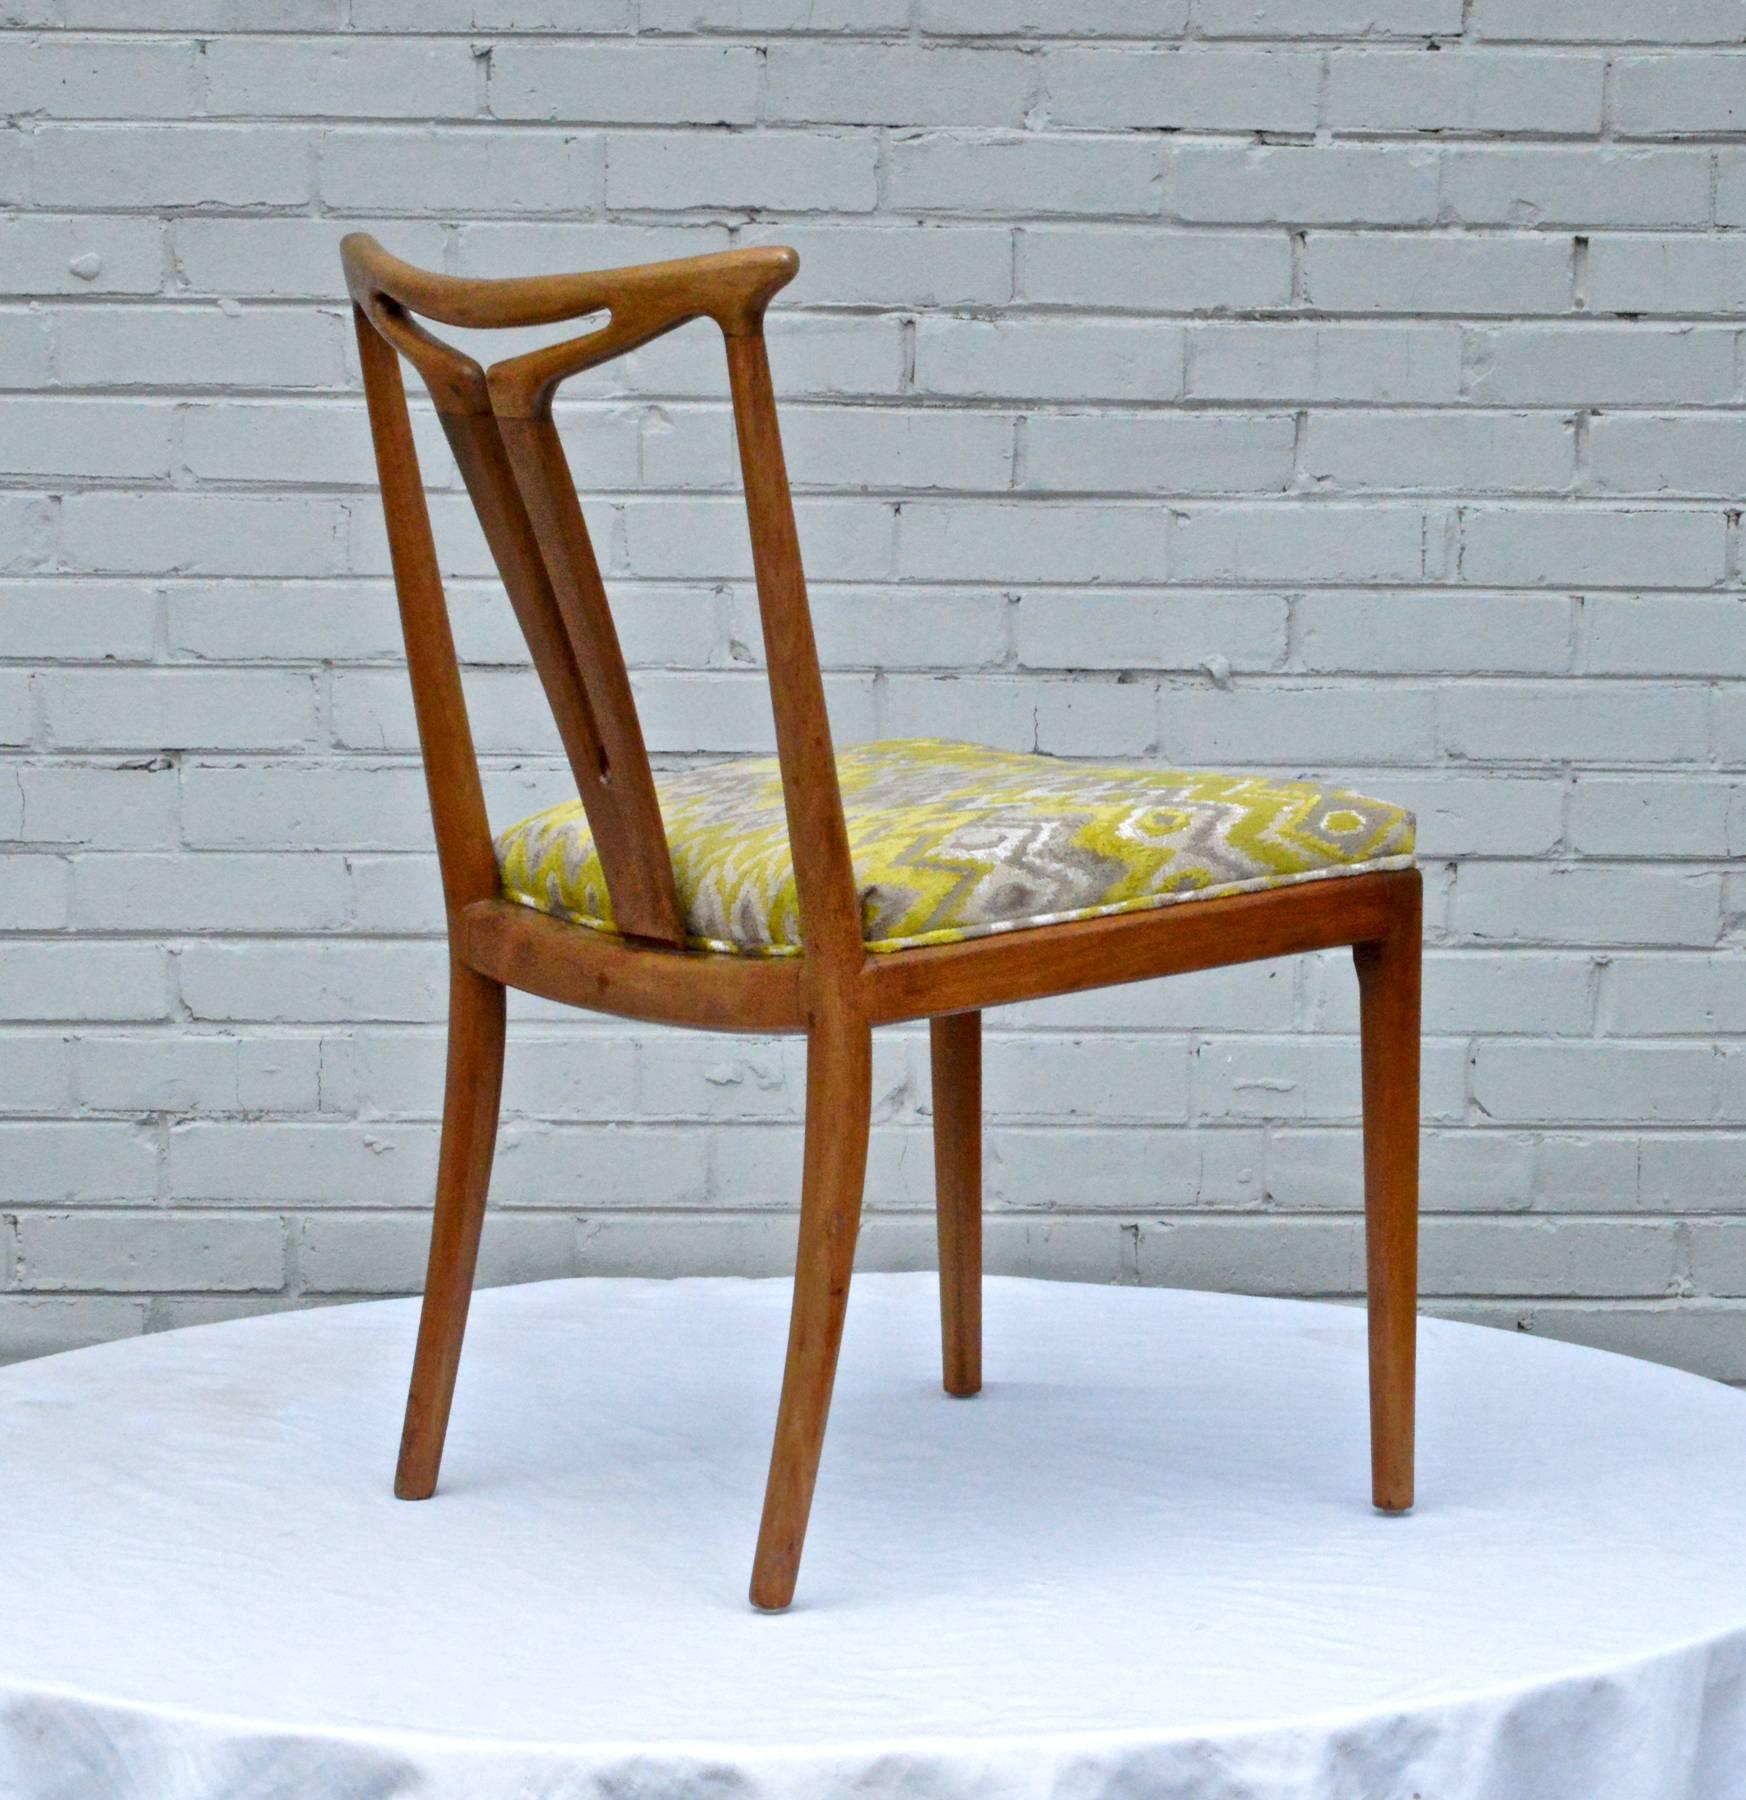 American Modern Chair Quad with T-Back Splats 3